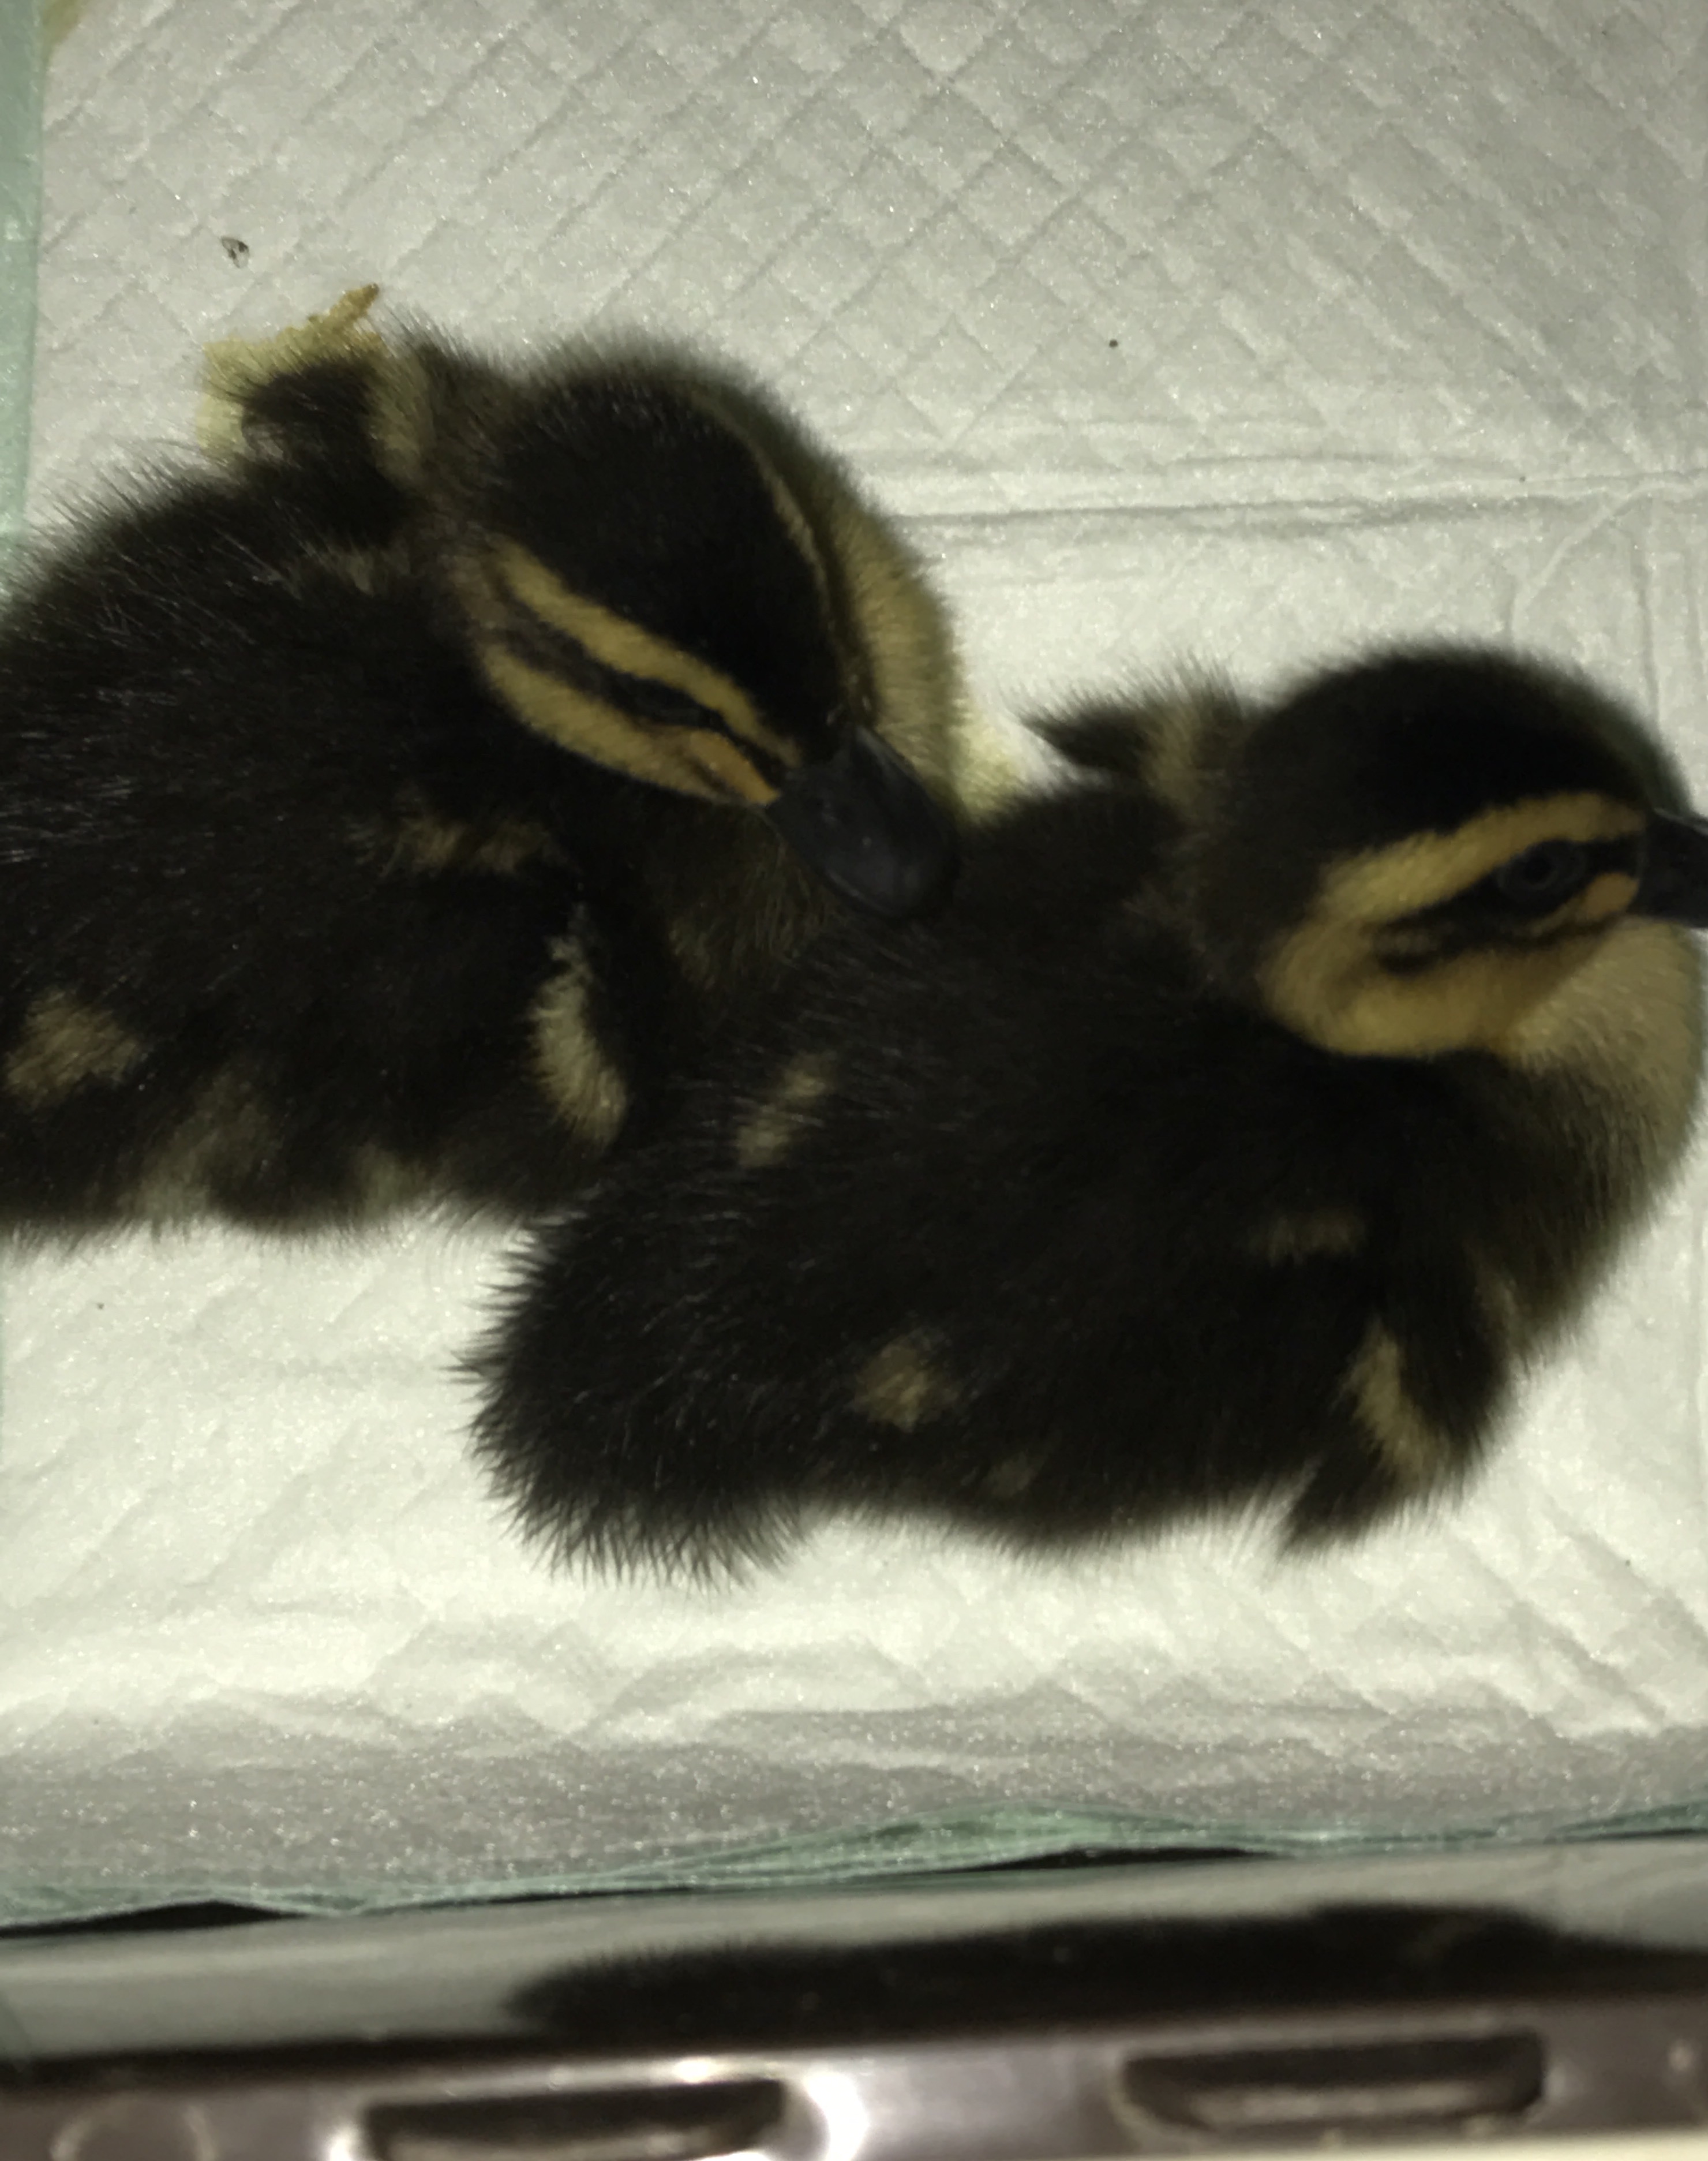 Welcome to Beowulf and Grendel our new Rouen ducklings